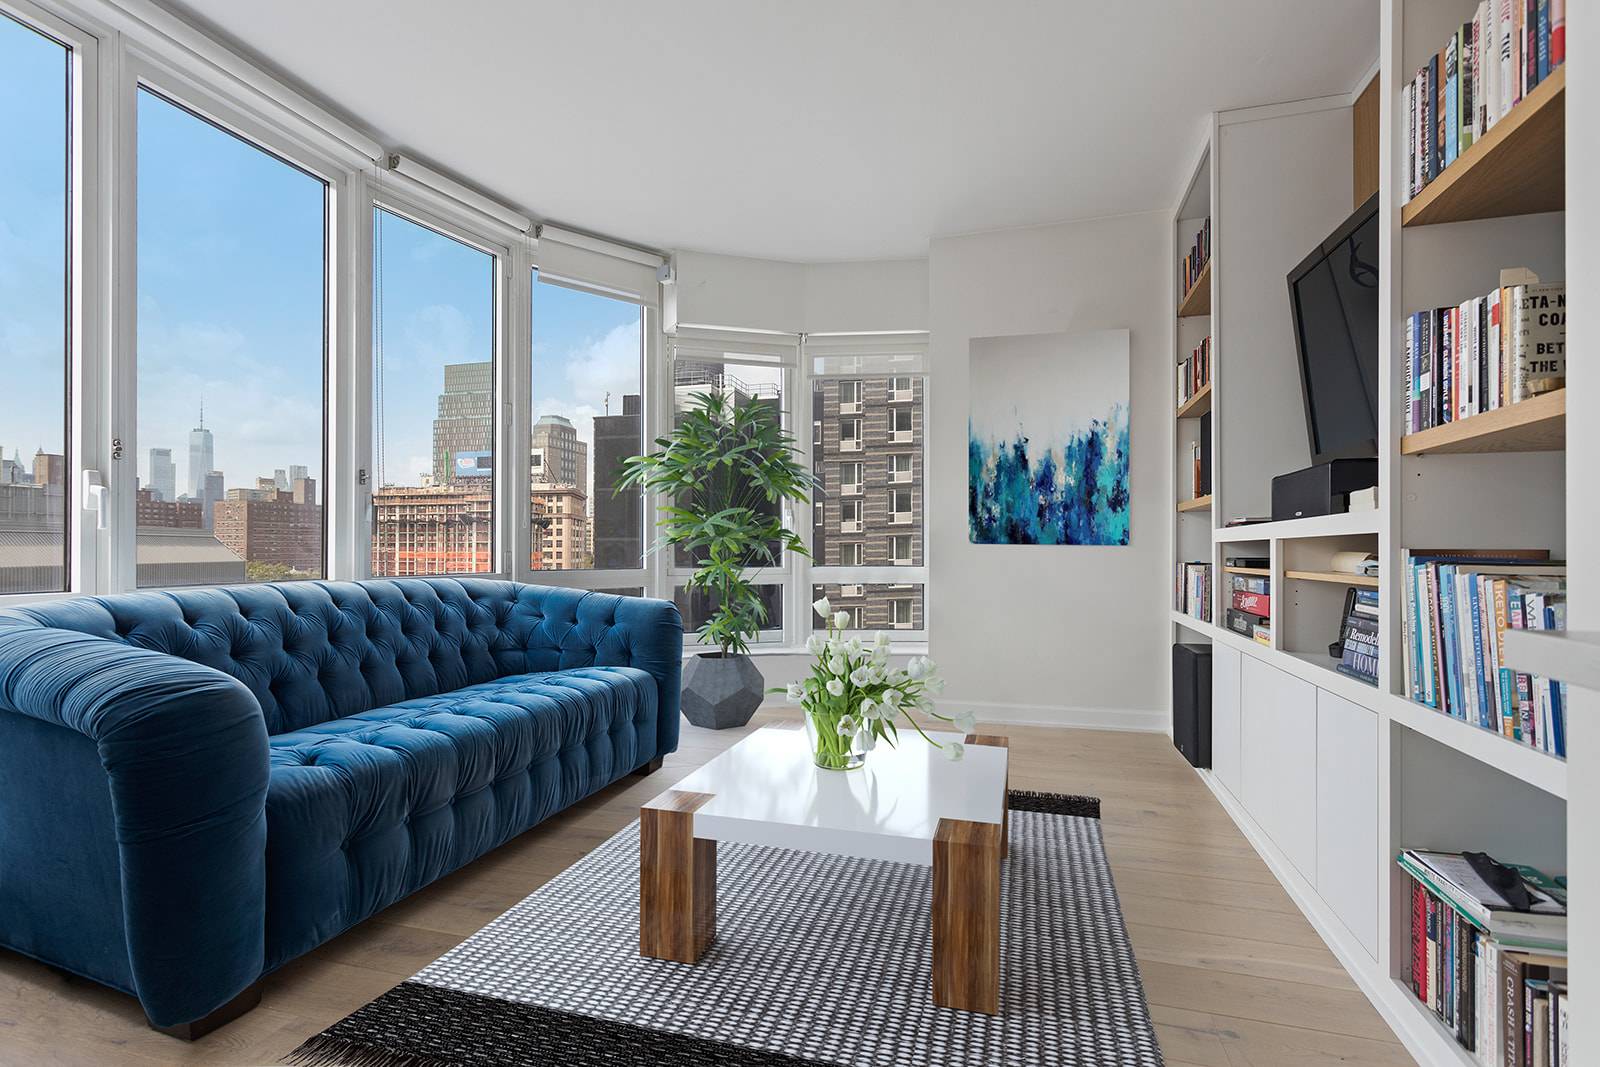 NO FEEDesigned by renowned architect Ismael Leyva the Oro condominium offers a modern and sophisticated condominium residence in downtown Brooklyn.